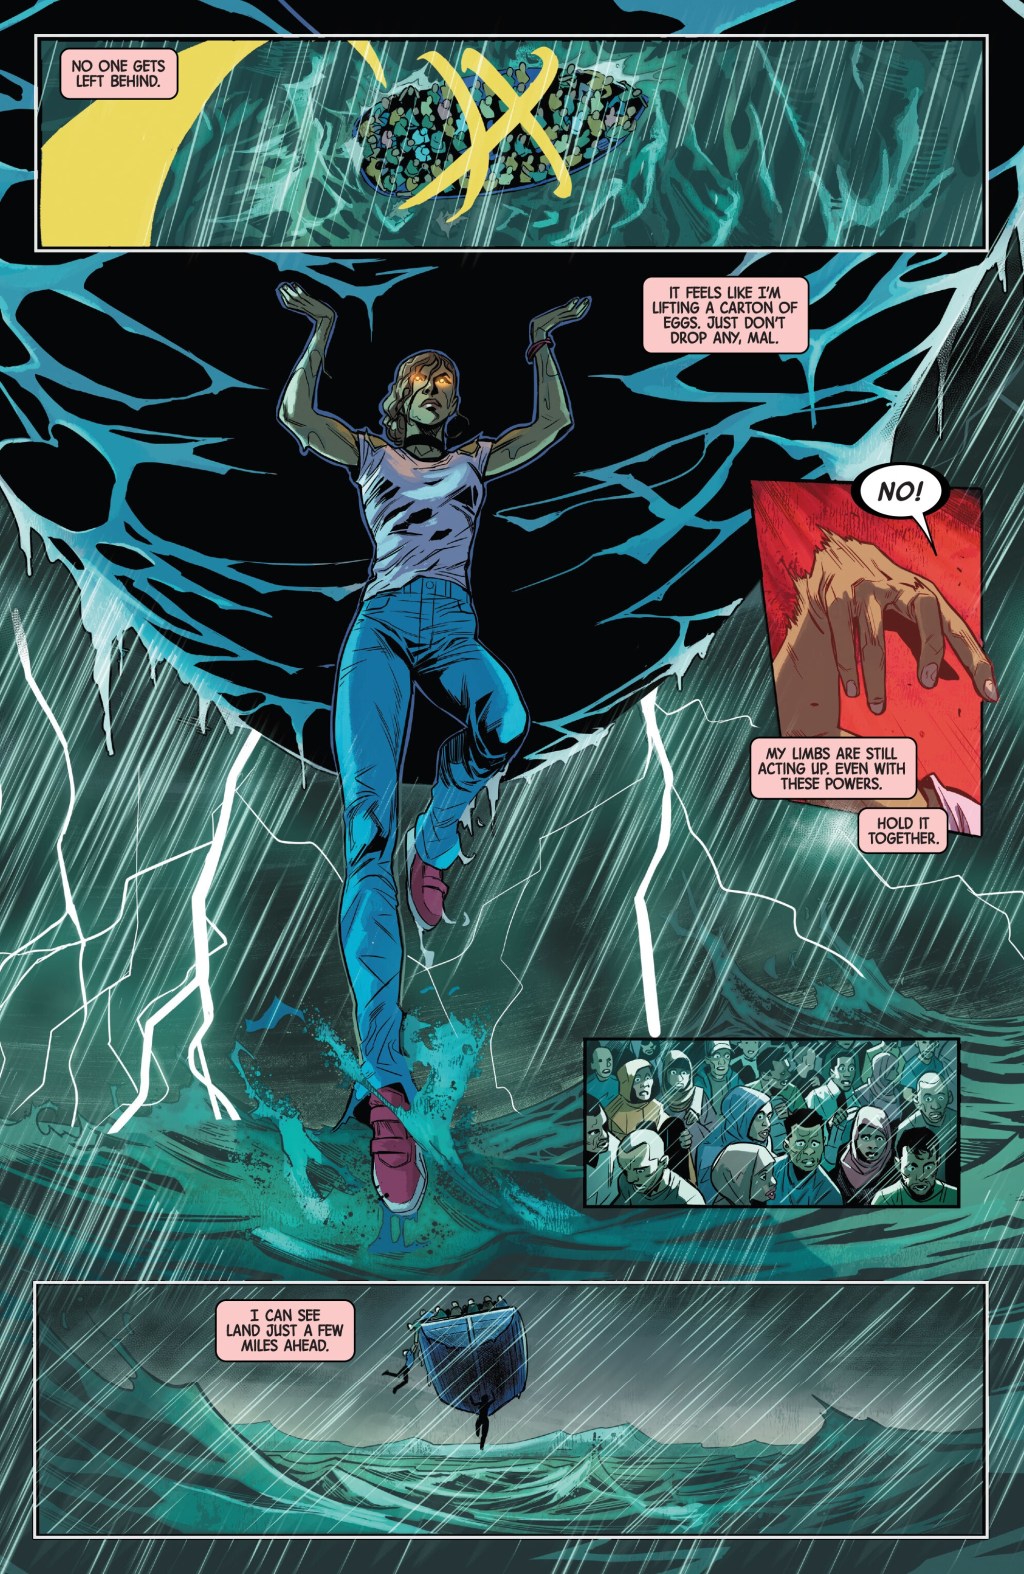 Mallory Gibbs tests out her new powers in Sentry Vol. 4 #2 "Legacy: Part II" (2024), Marvel Comics. Words by Jason Loo, art by Luigi Zagaria, David Cutler, Arthur Hesli, and Joe Caramgna.